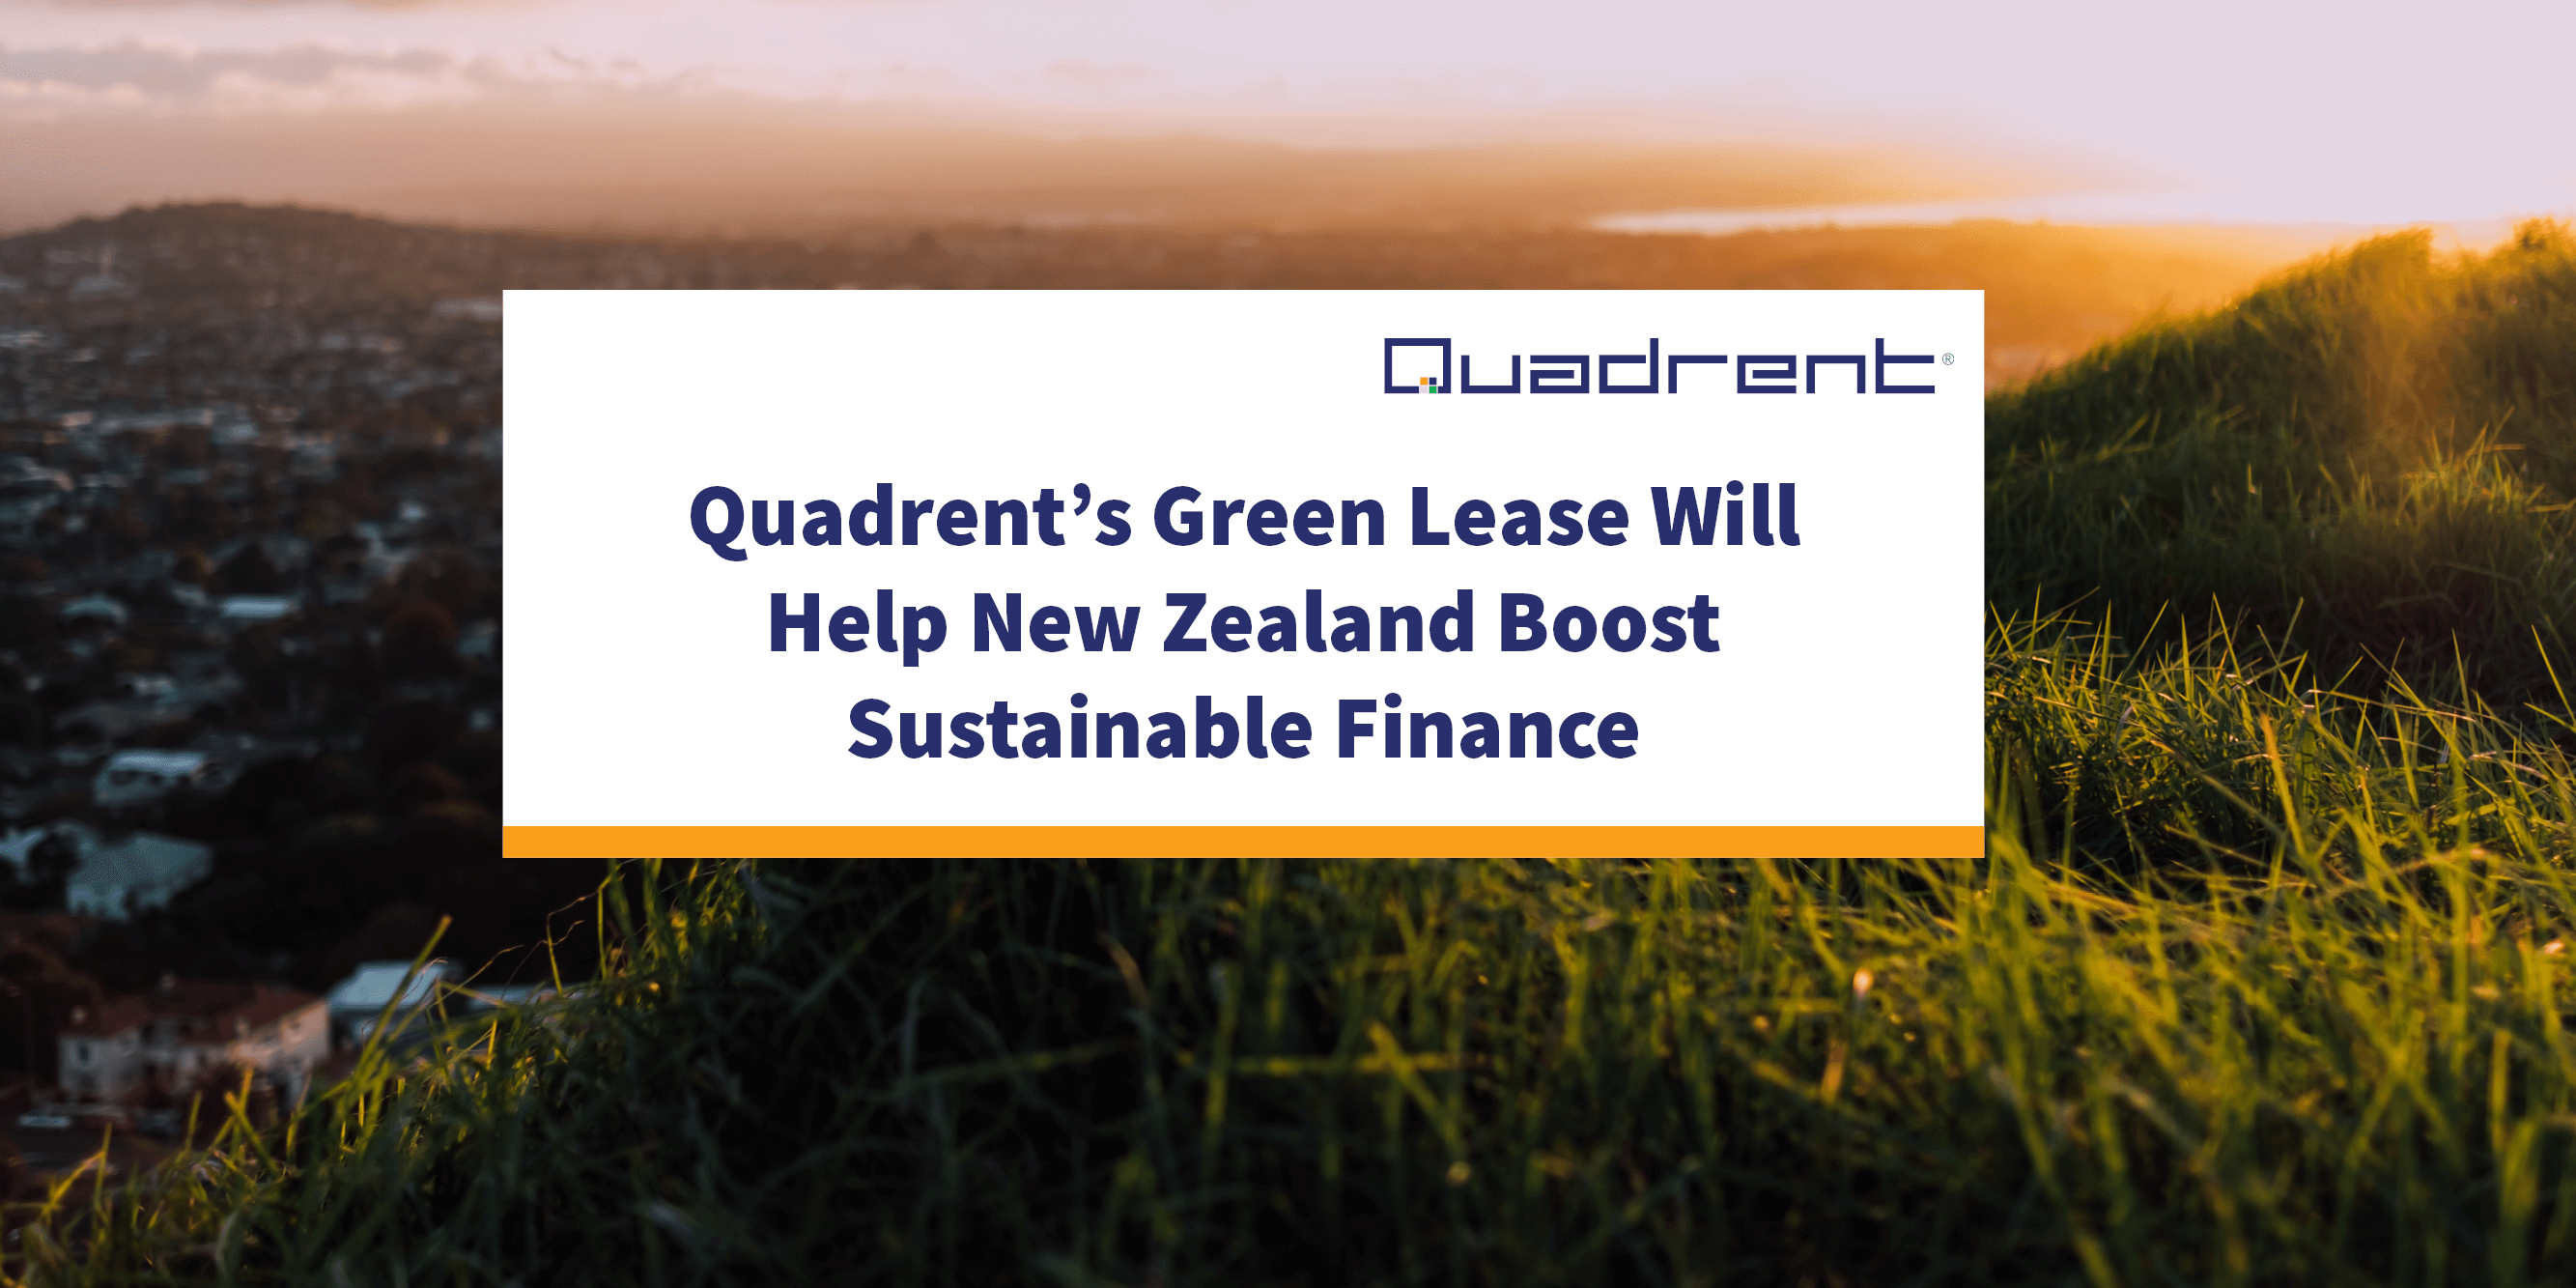 Quadrent’s Green Lease Will Help New Zealand Boost Sustainable Finance